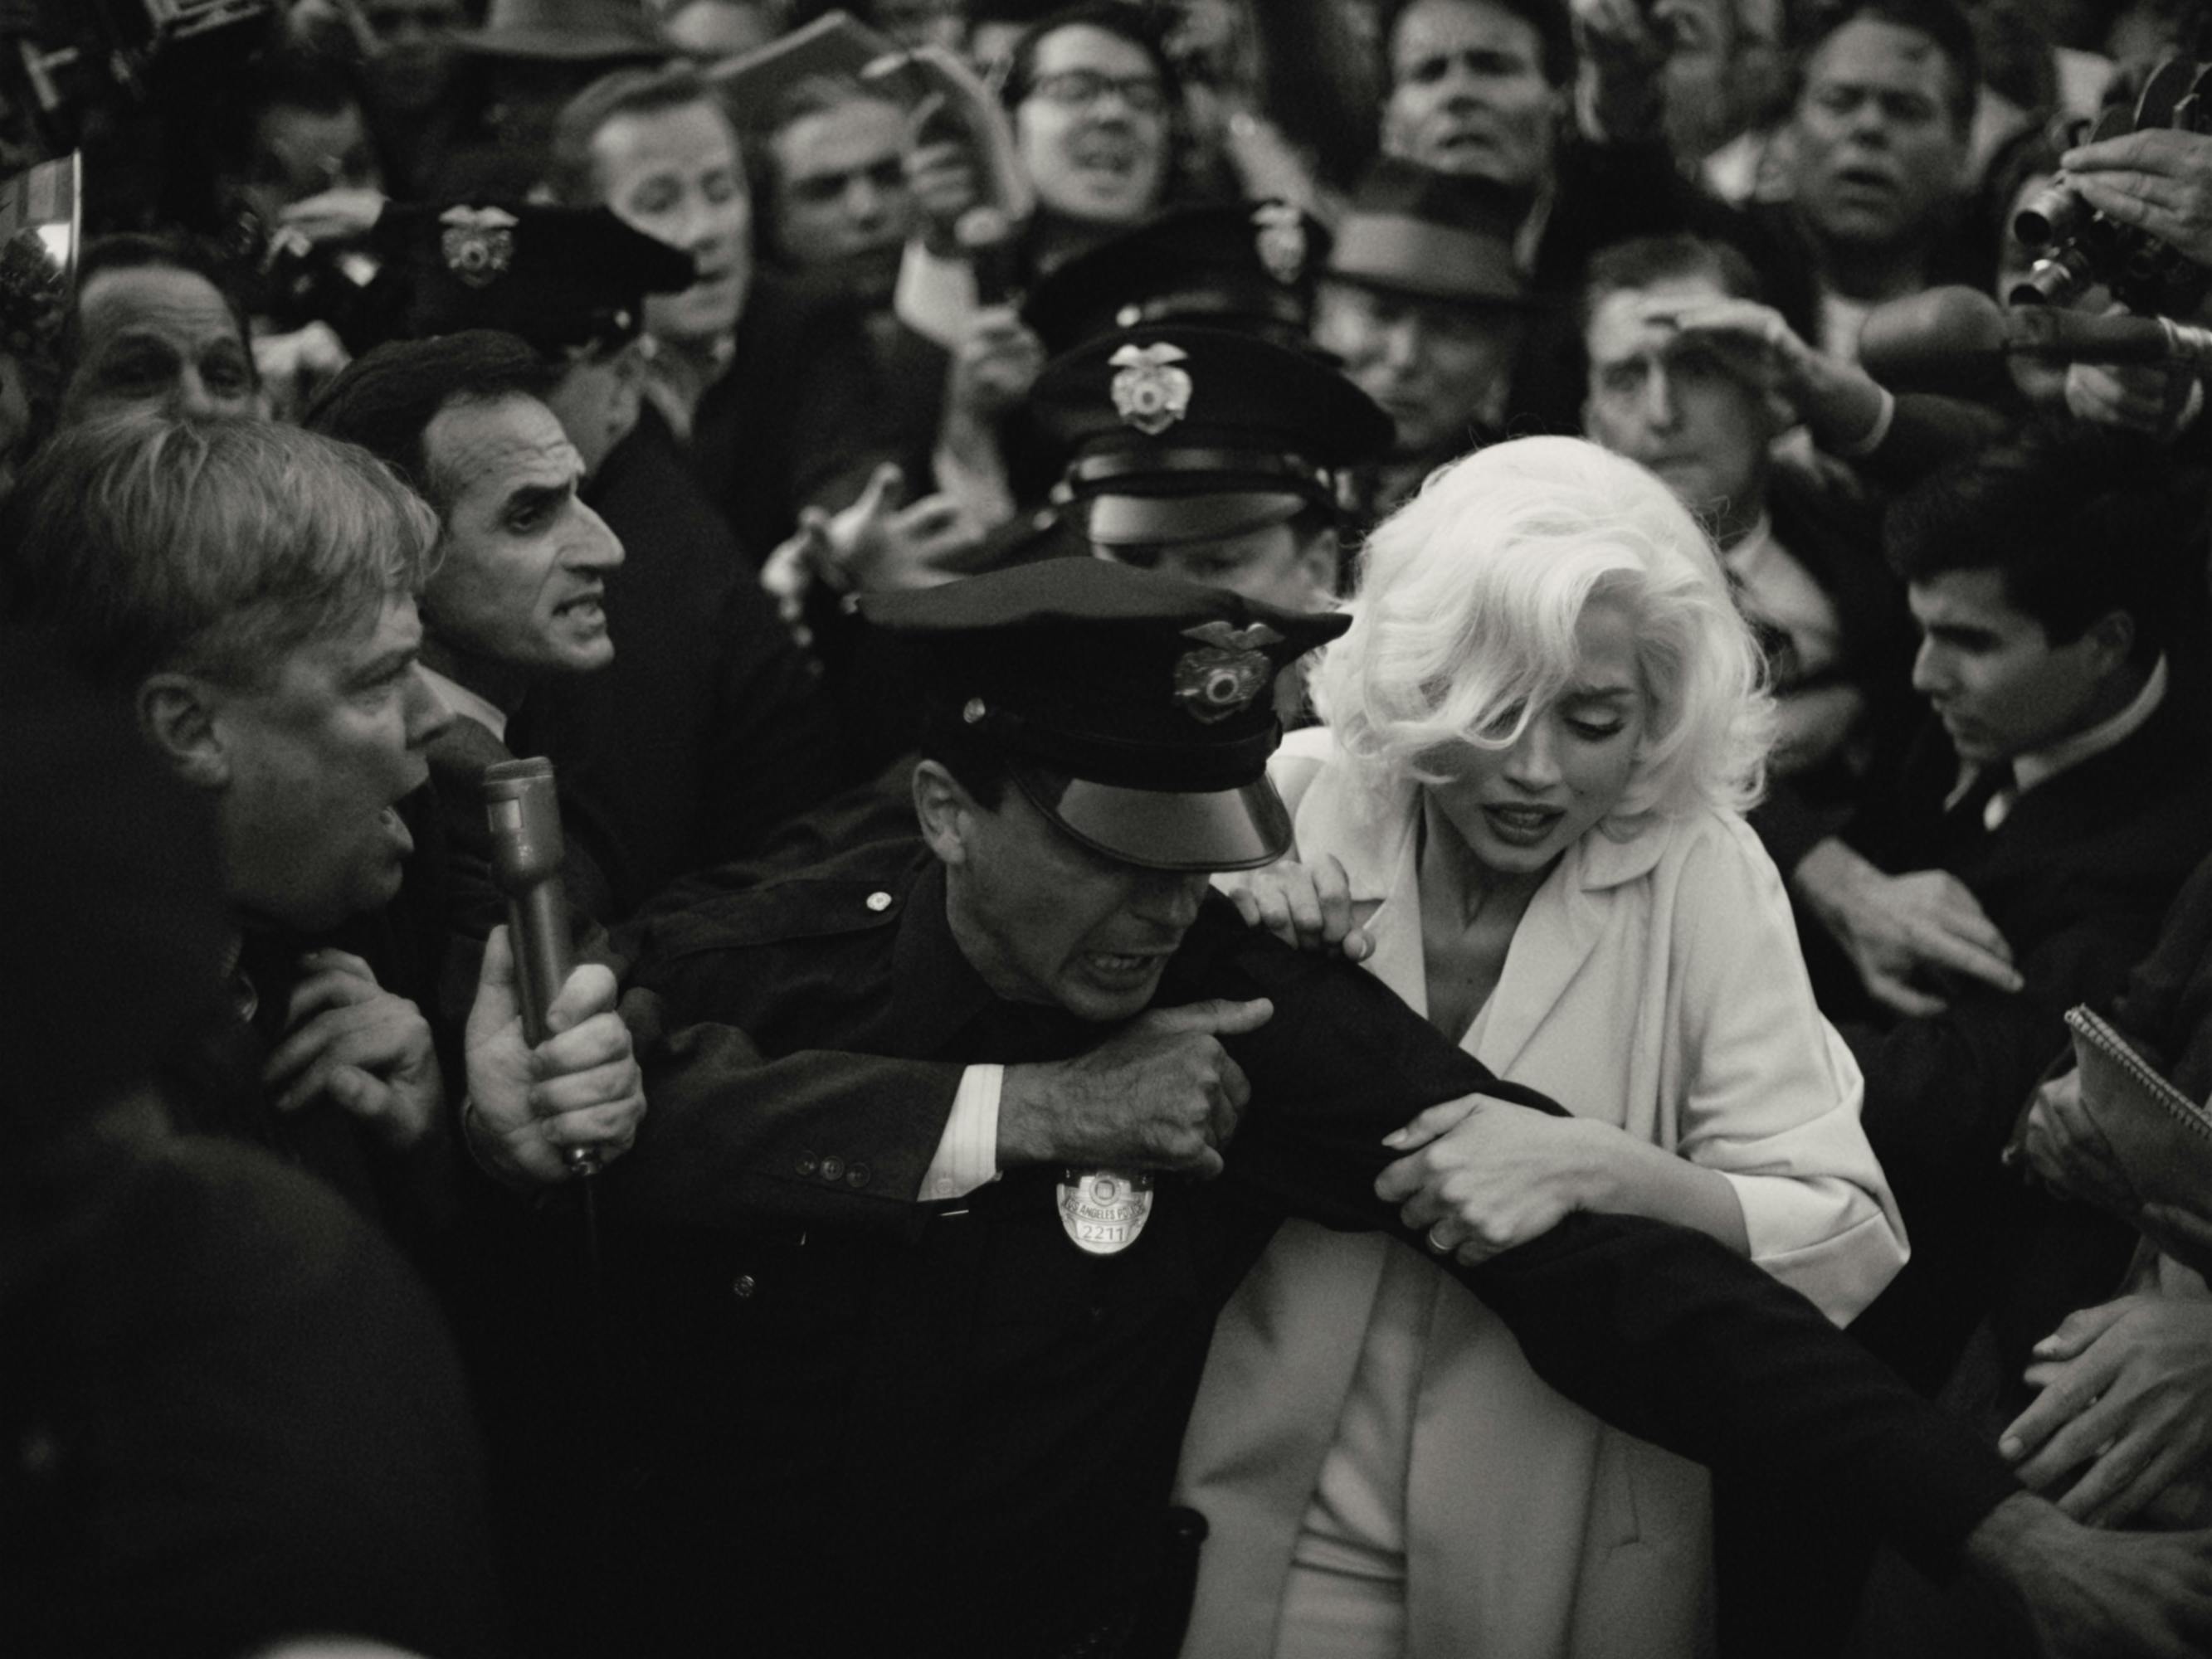 Marilyn Monroe (Ana de Armas) makes her way through a ravenous crowd with the help of a police officer.